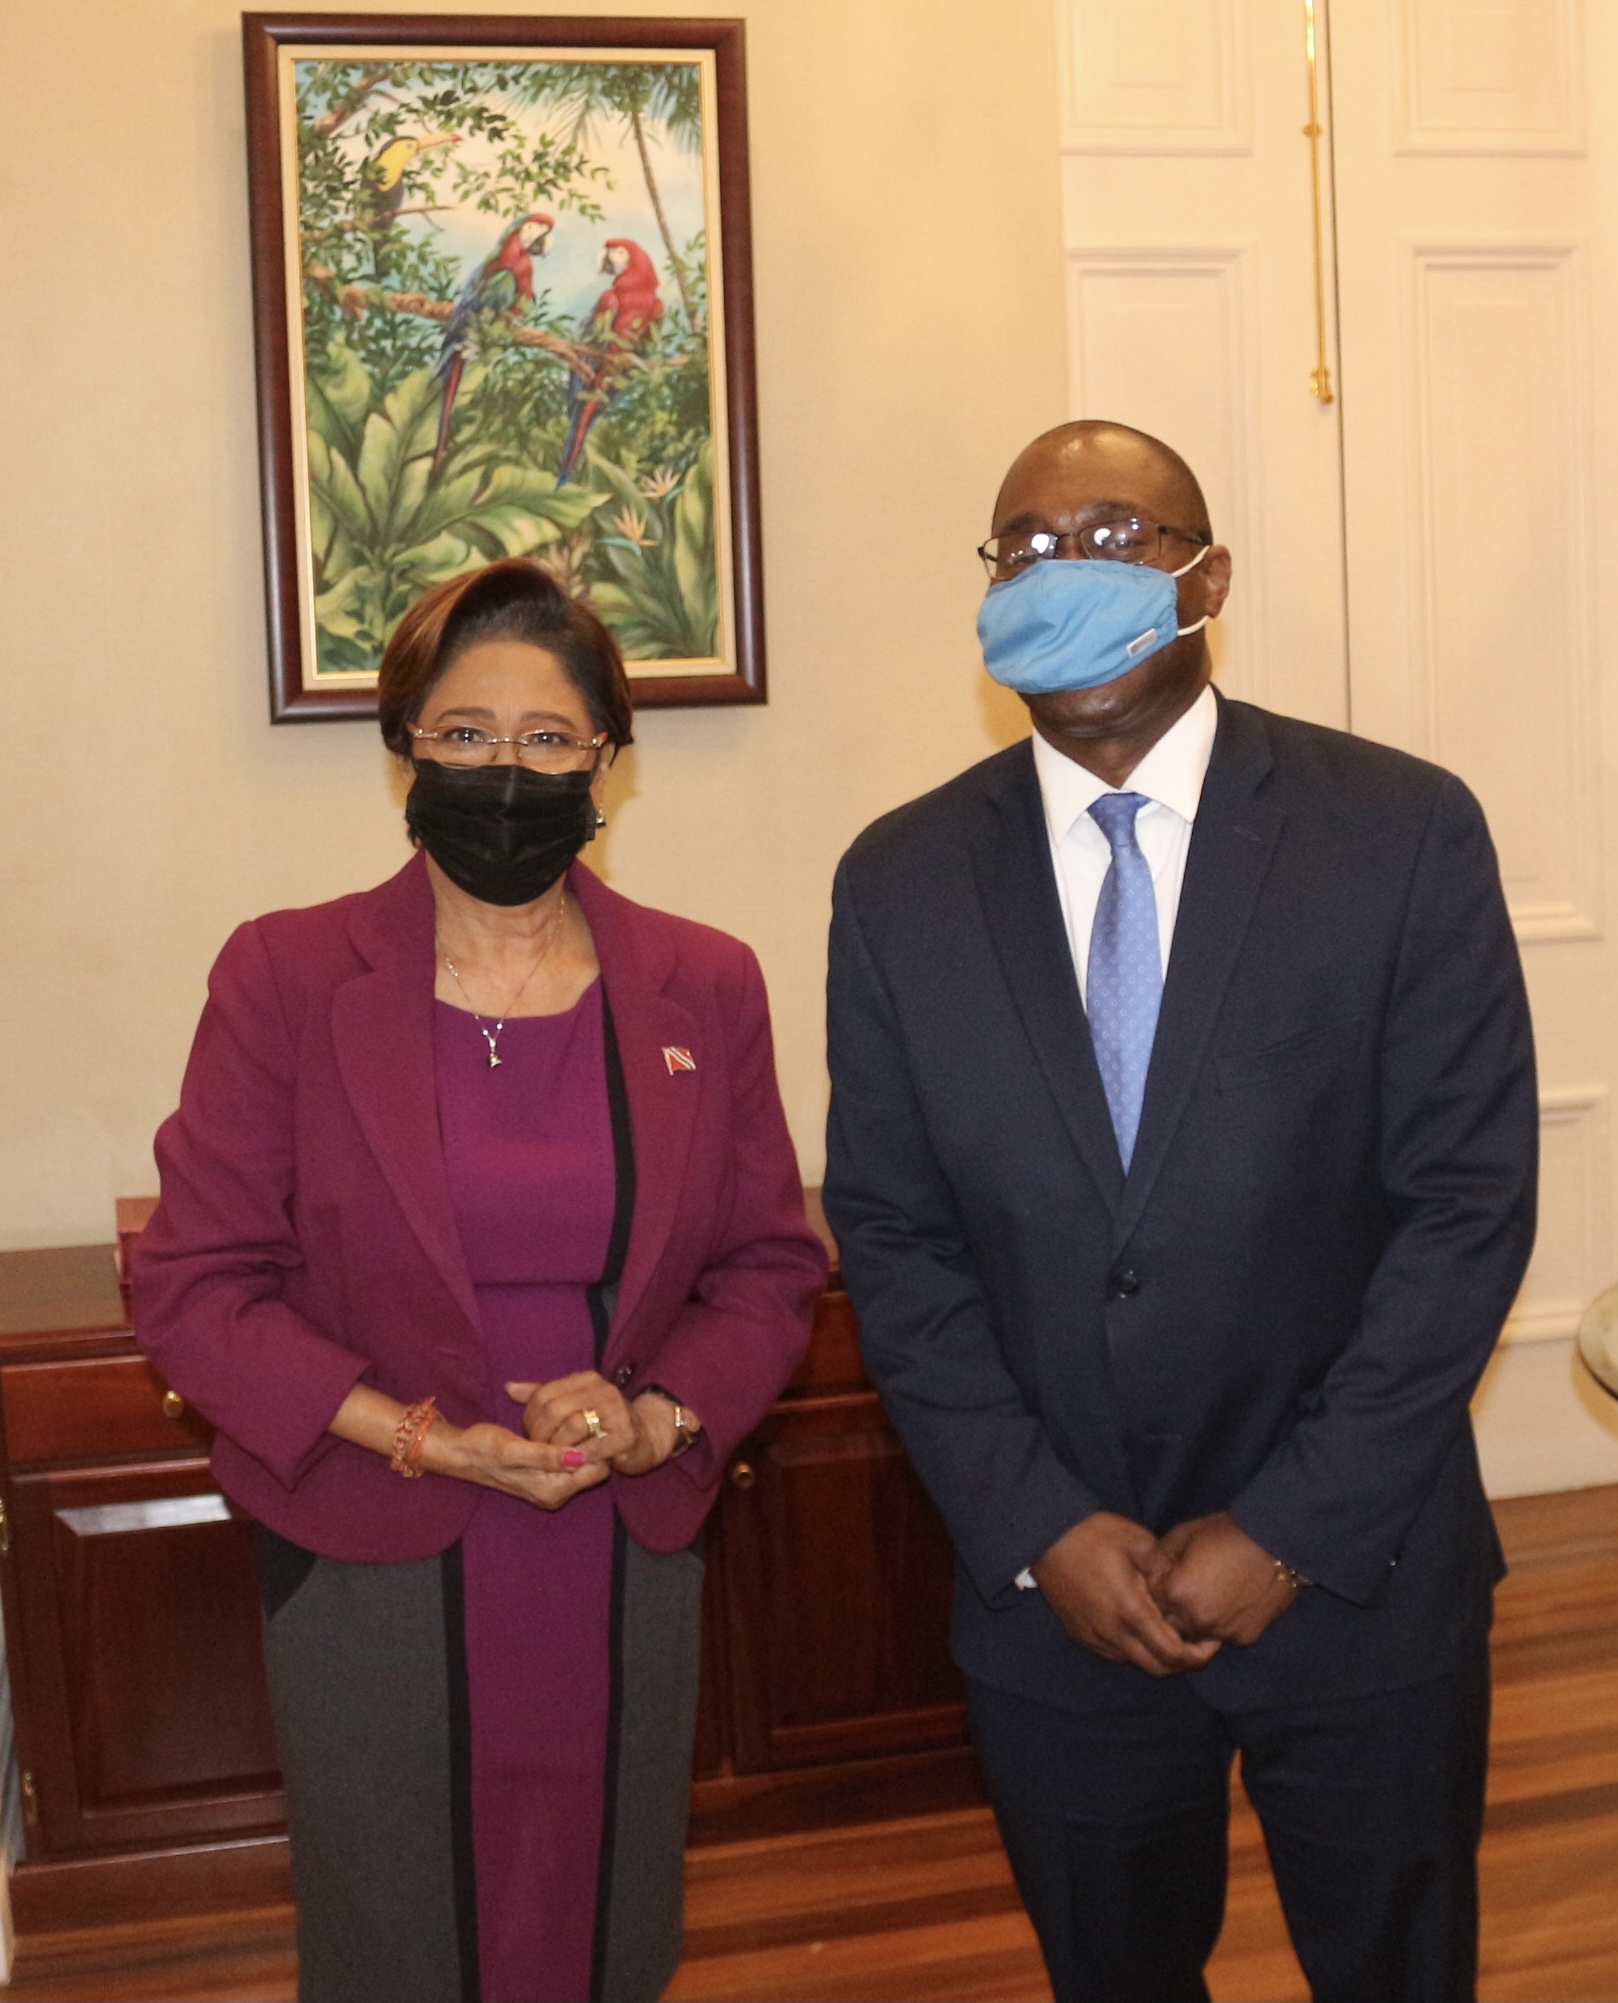 Kamla and the Chargé d’Affaires of the U.S discussed issues of national importance